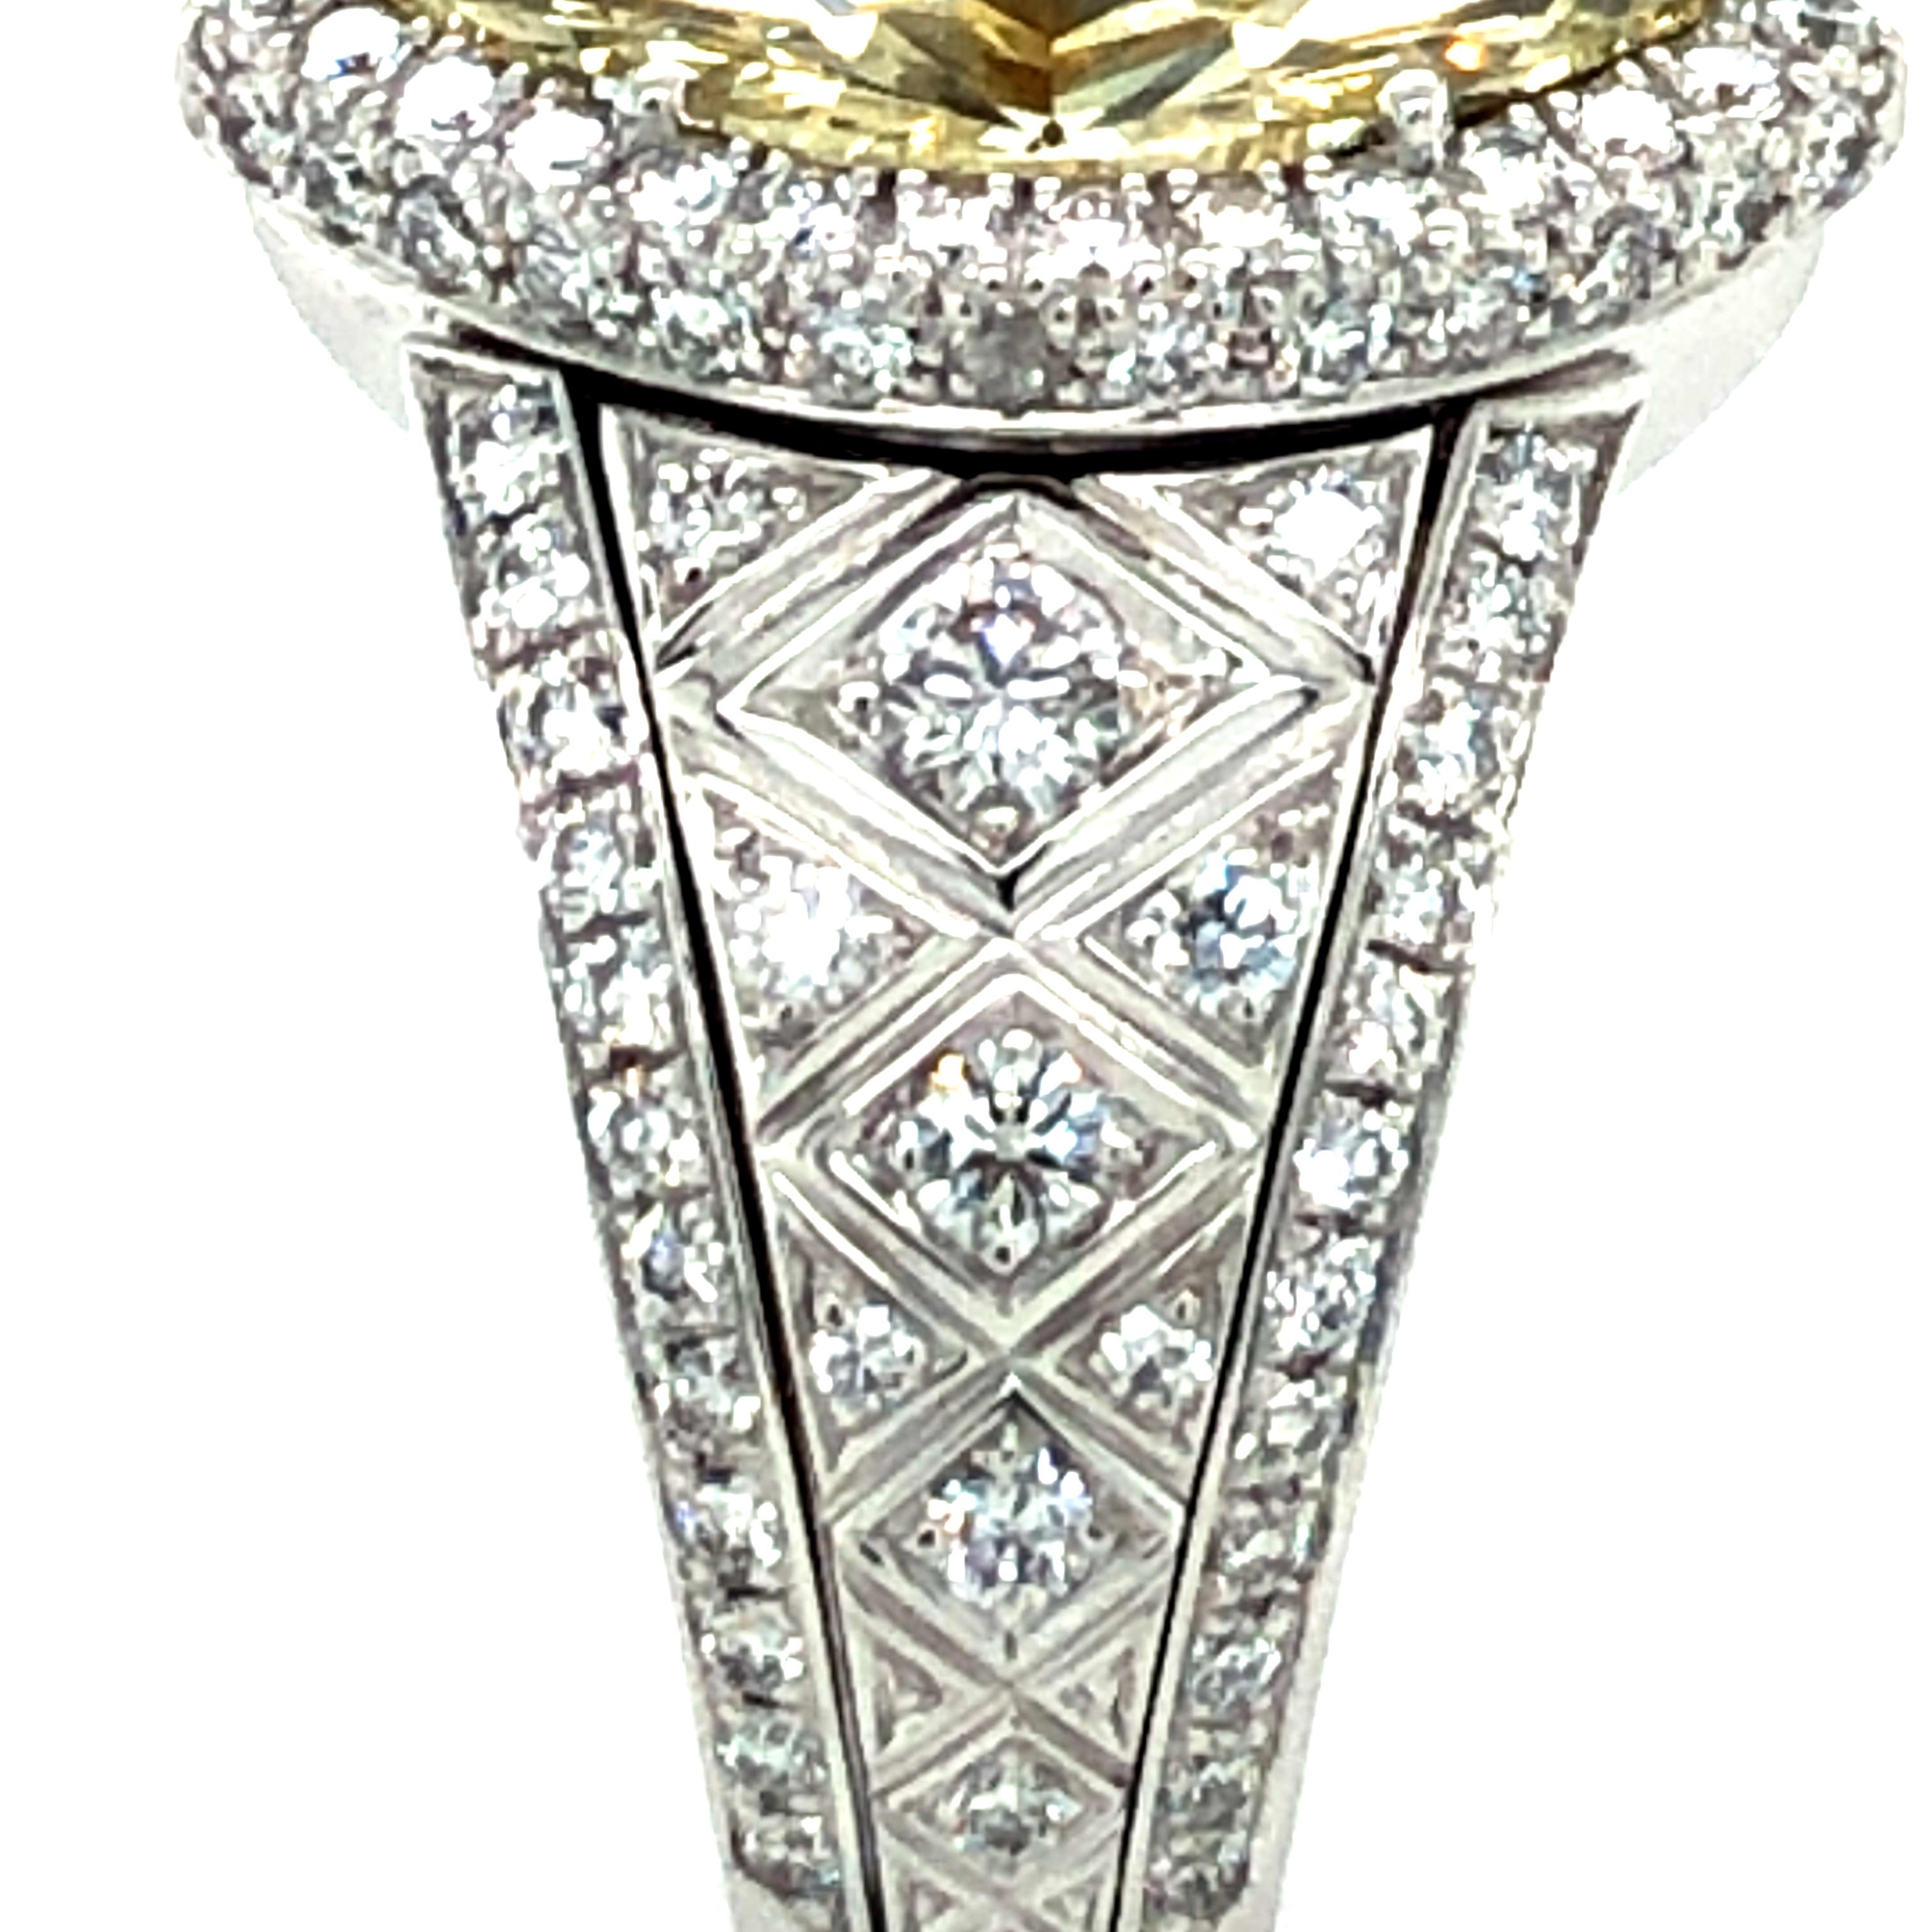 2.77 Carat Marquise-Cut Diamond Ring by Avalon Swiss in 18 Karat White Gold For Sale 3